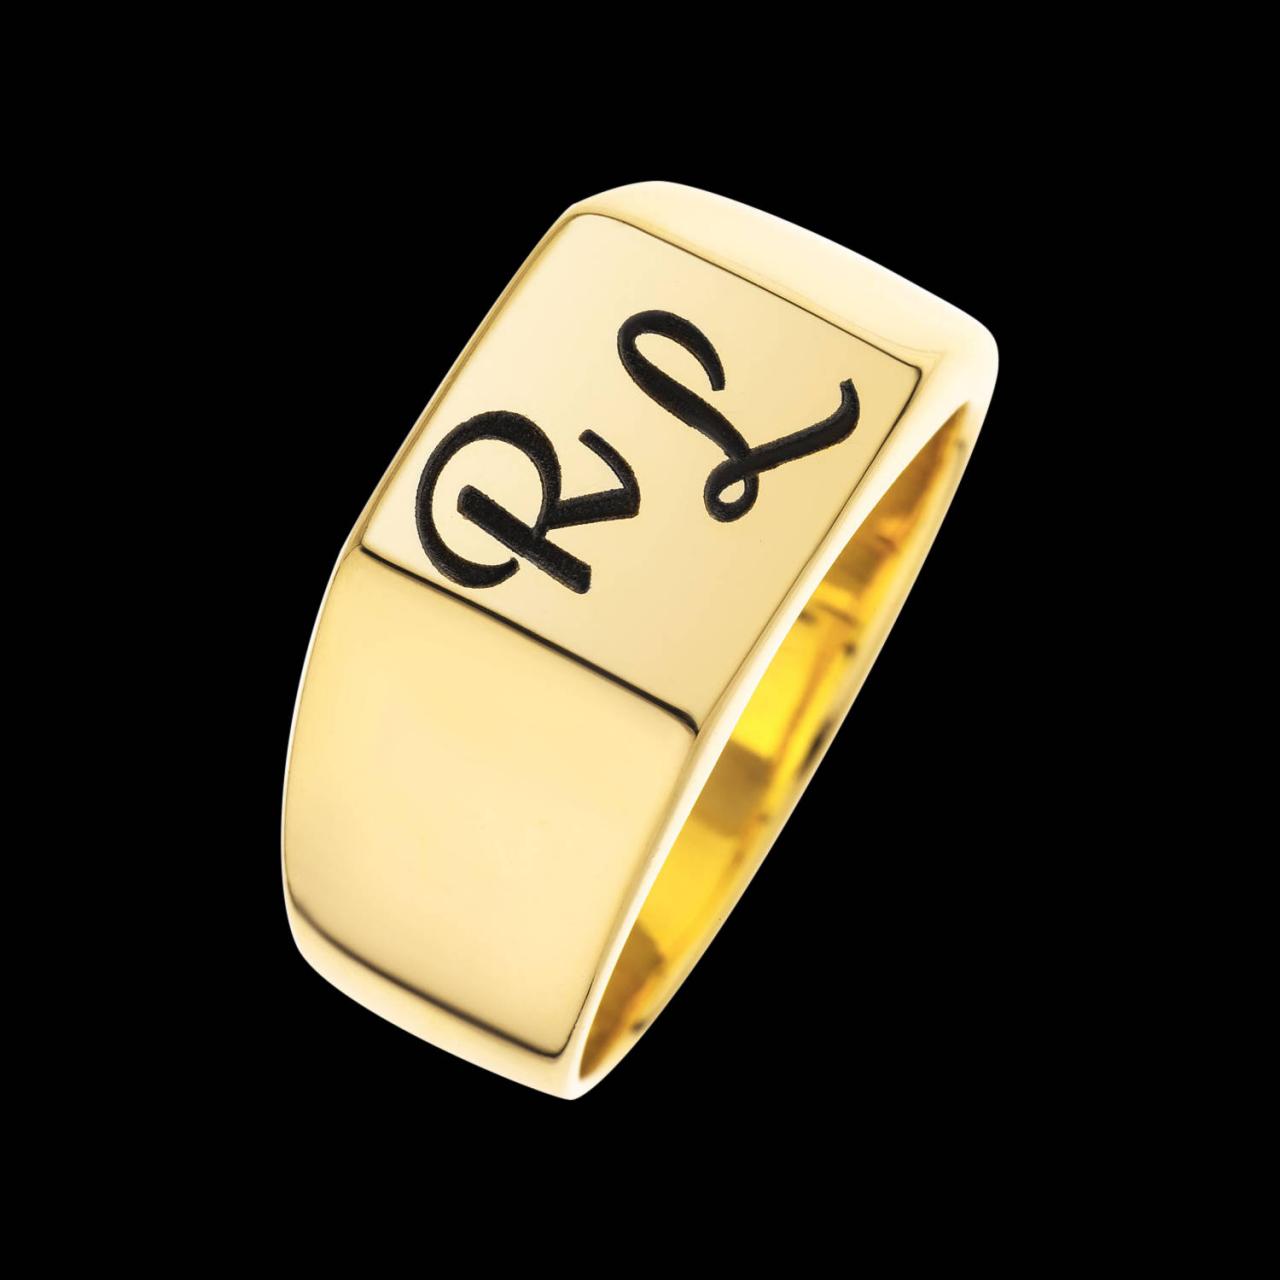 Personalized Ring - Custom Ring - Engraved Ring - Personalized Jewelry - Personalized Gift - Personalized Letter Ring - Gold Initials Ring -